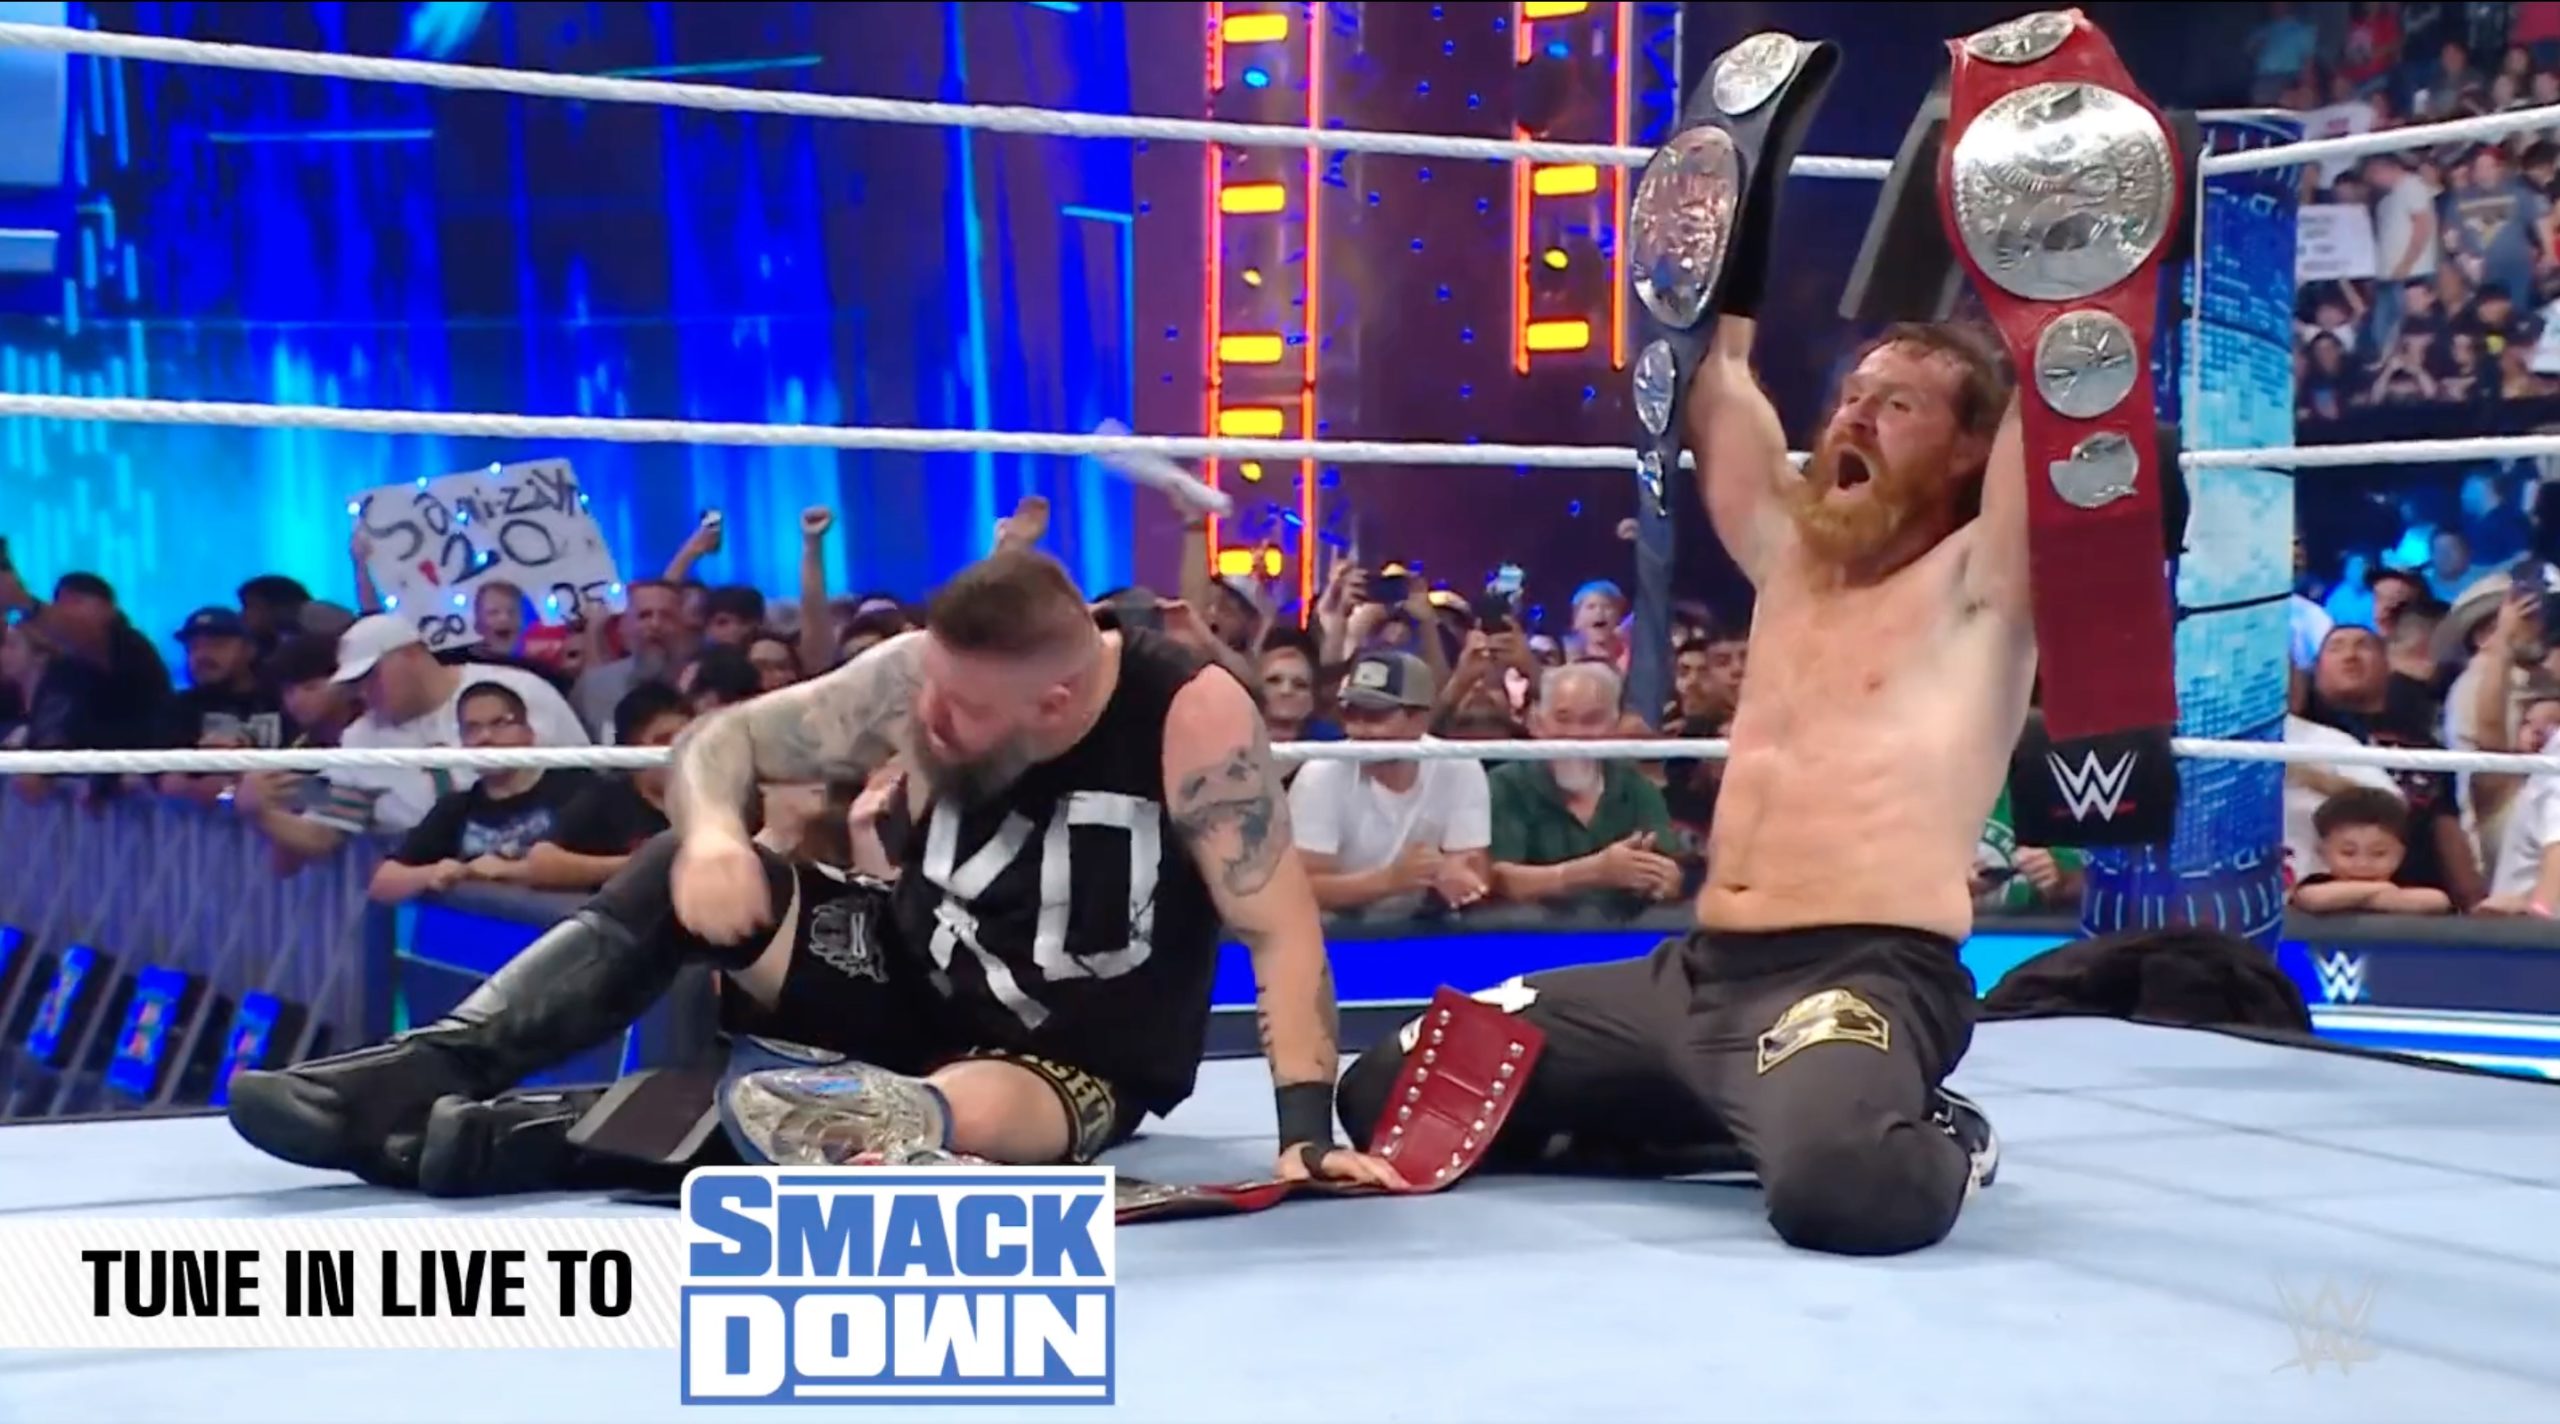 WWE SmackDown results, recap, grades: Bad Bunny, LWO stand tall in